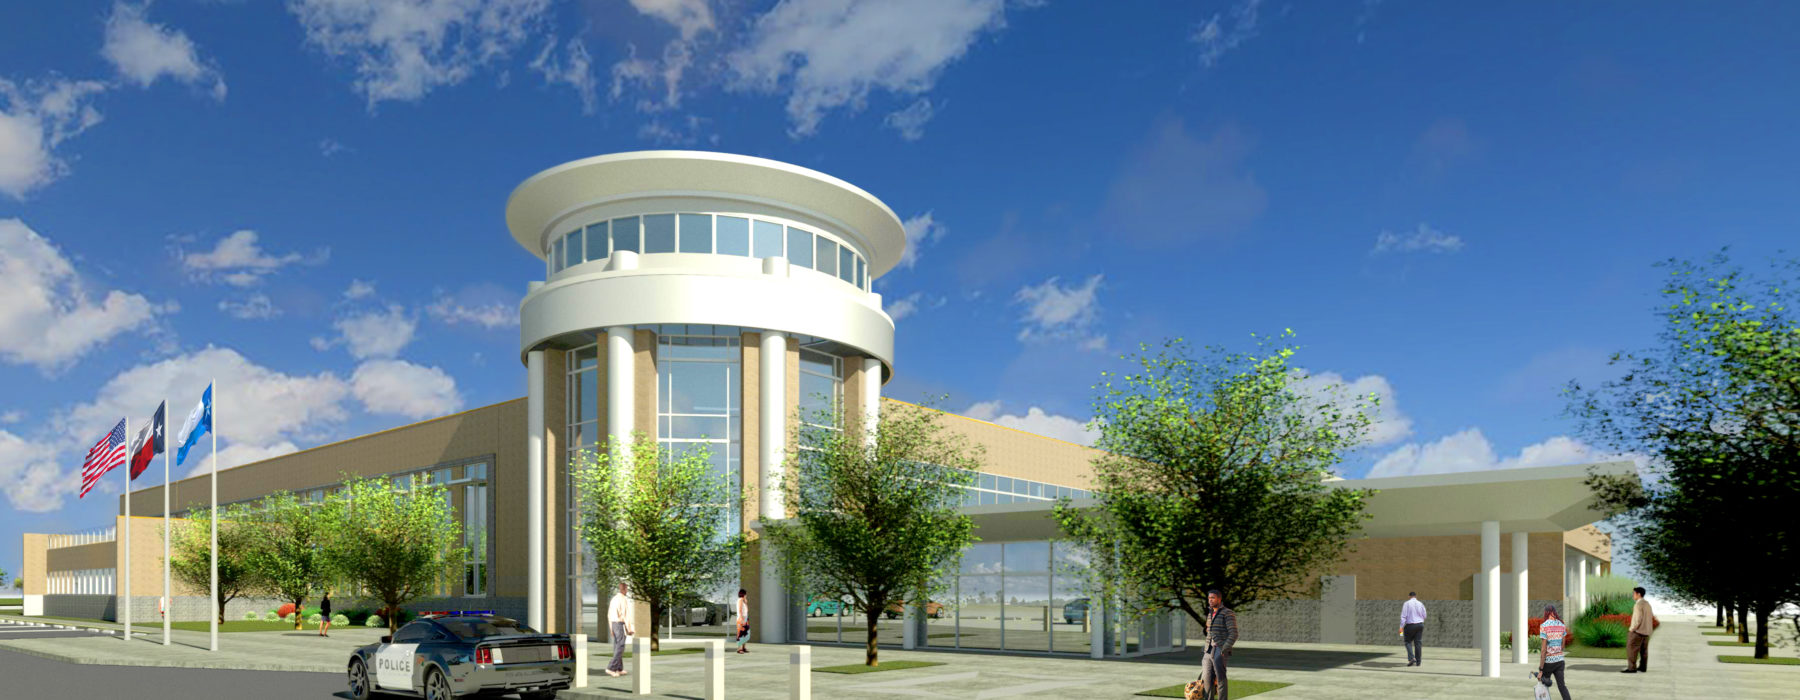 Front Rendering of the Dallas County South Government Center